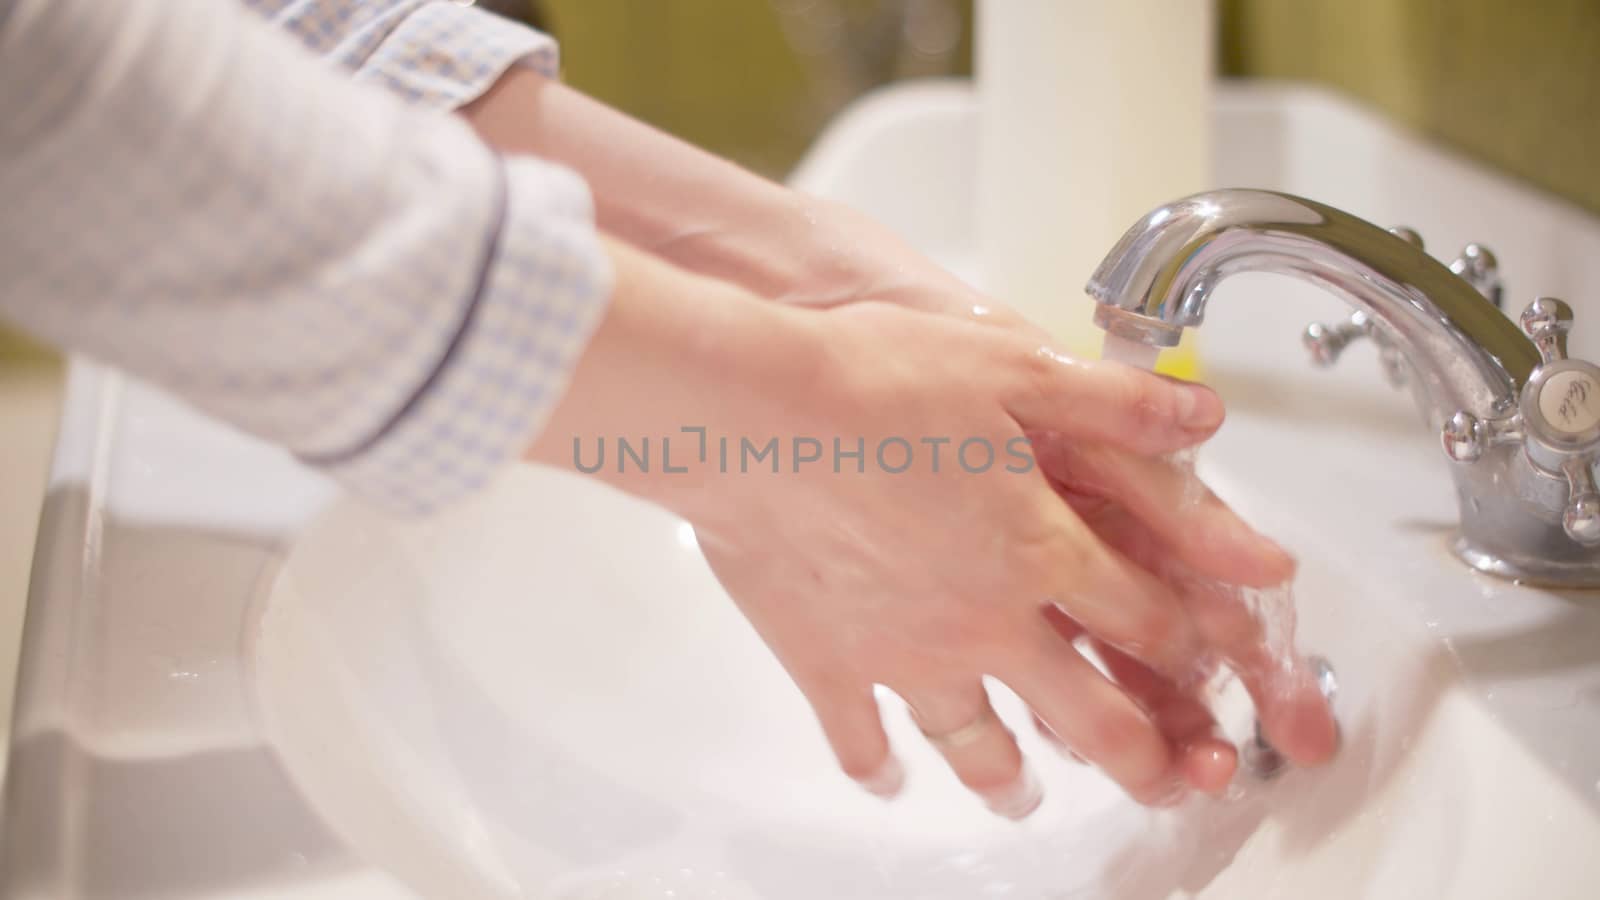 Woman scrupulously washing her hands. Close up female hands under water a bright bathroom. Hygiene during epidemic. Covid-19 pandemic